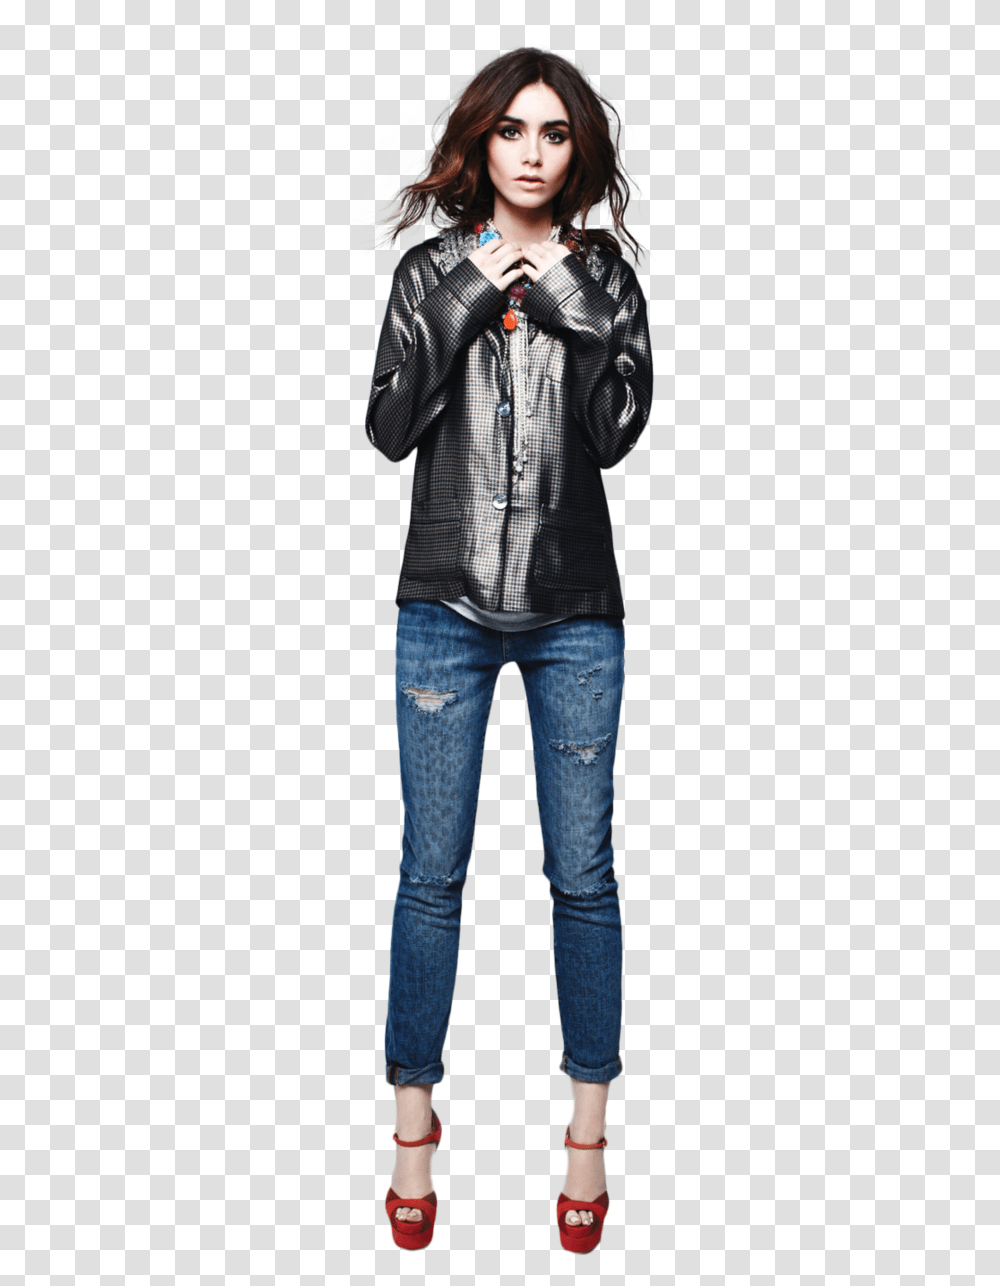 Lily Collins Actress And Clary Fray Image Lily Collins, Pants, Apparel, Jeans Transparent Png